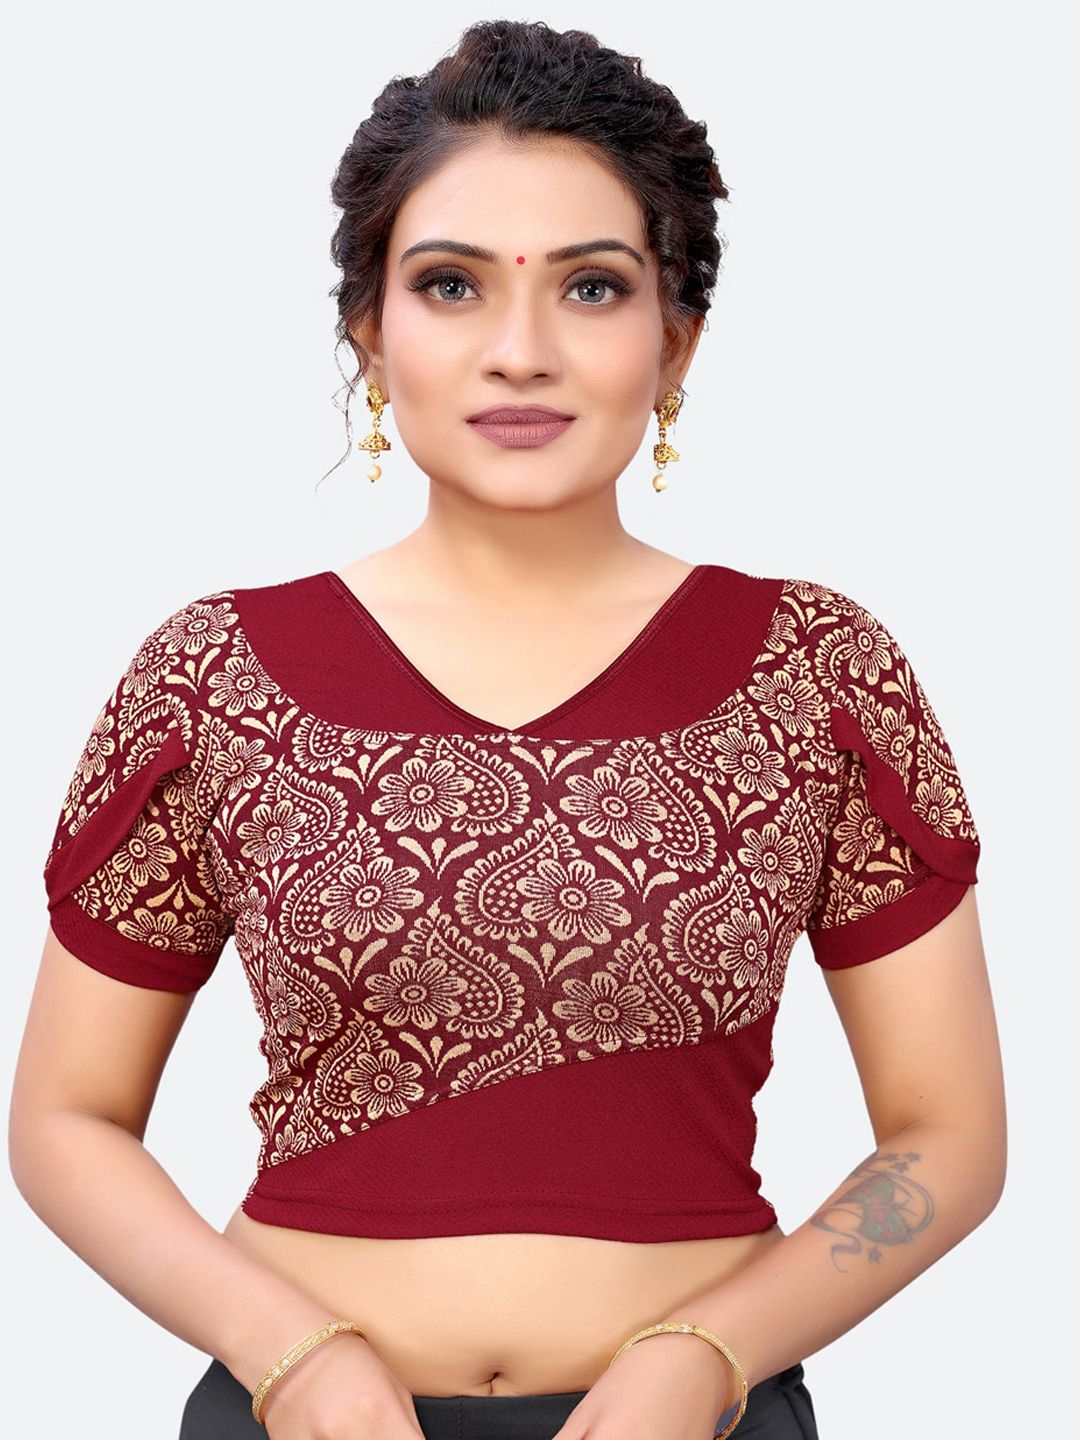 SIRIL Maroon & Beige Woven Design Saree Blouse Price in India